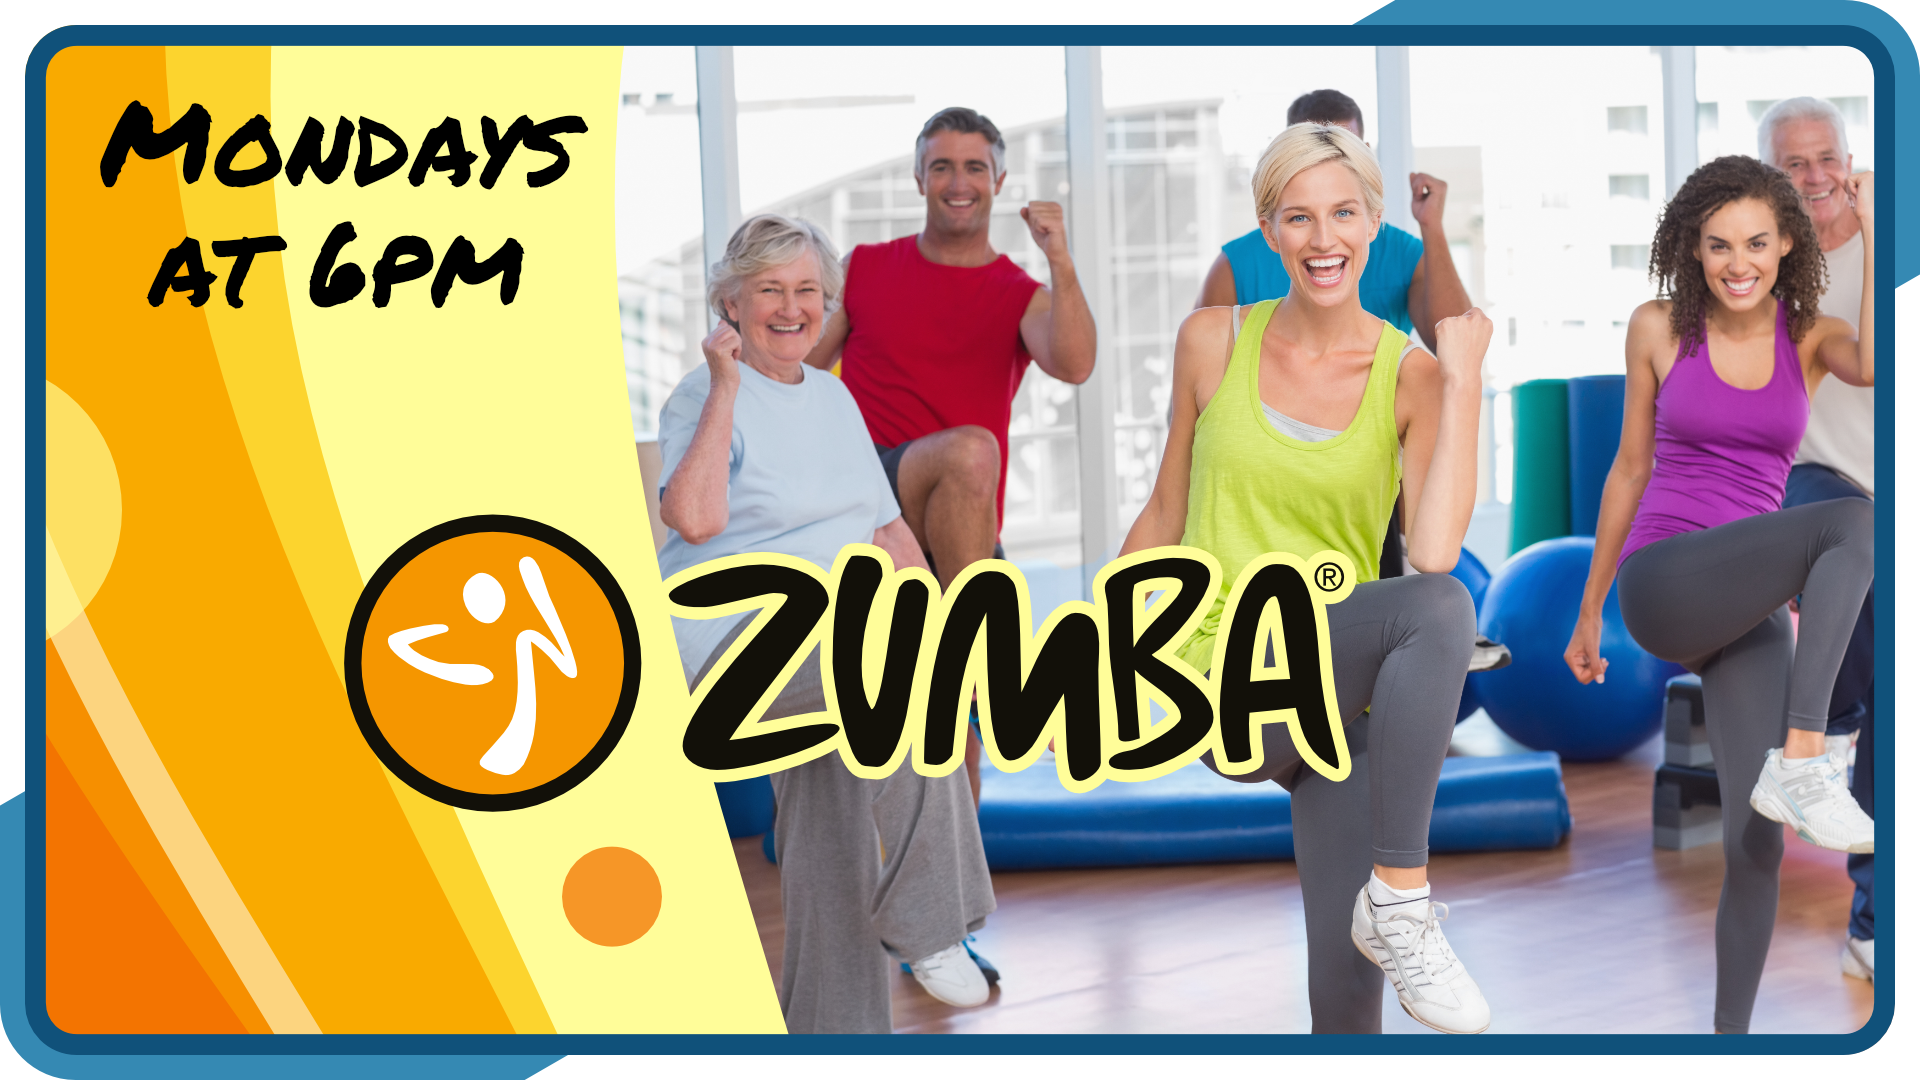 Zumba Gold, Mondays weekly at 6pm, intended for ages 18+